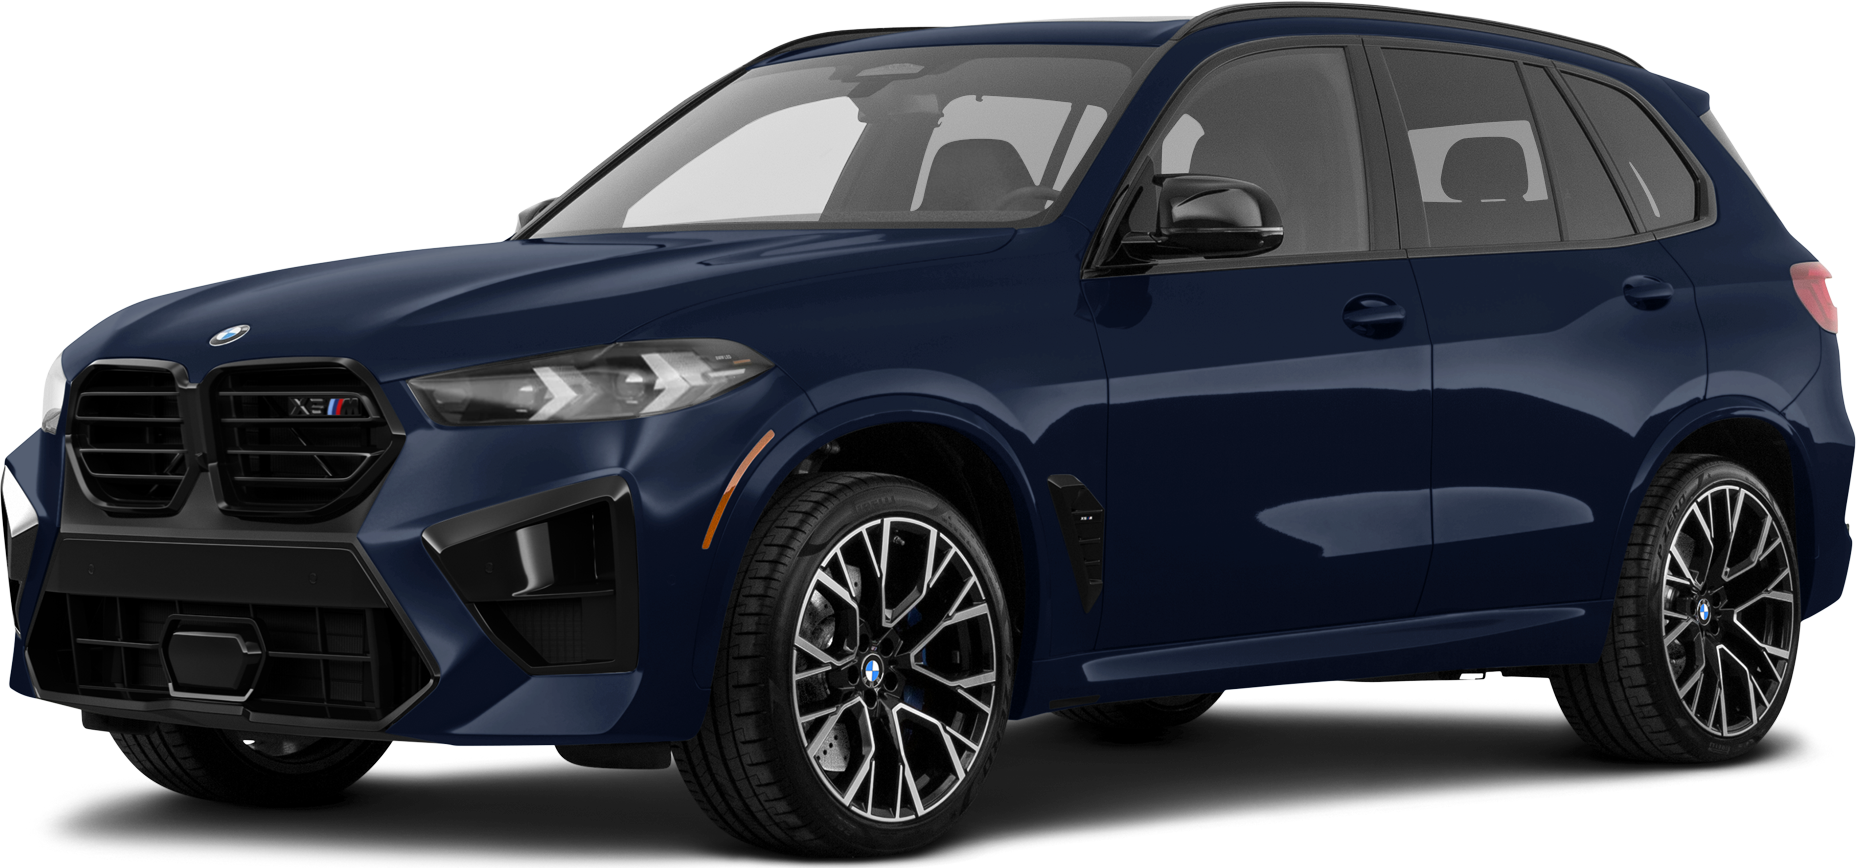 BMW X5 M Technical Specs - Dimensions, Engines & more